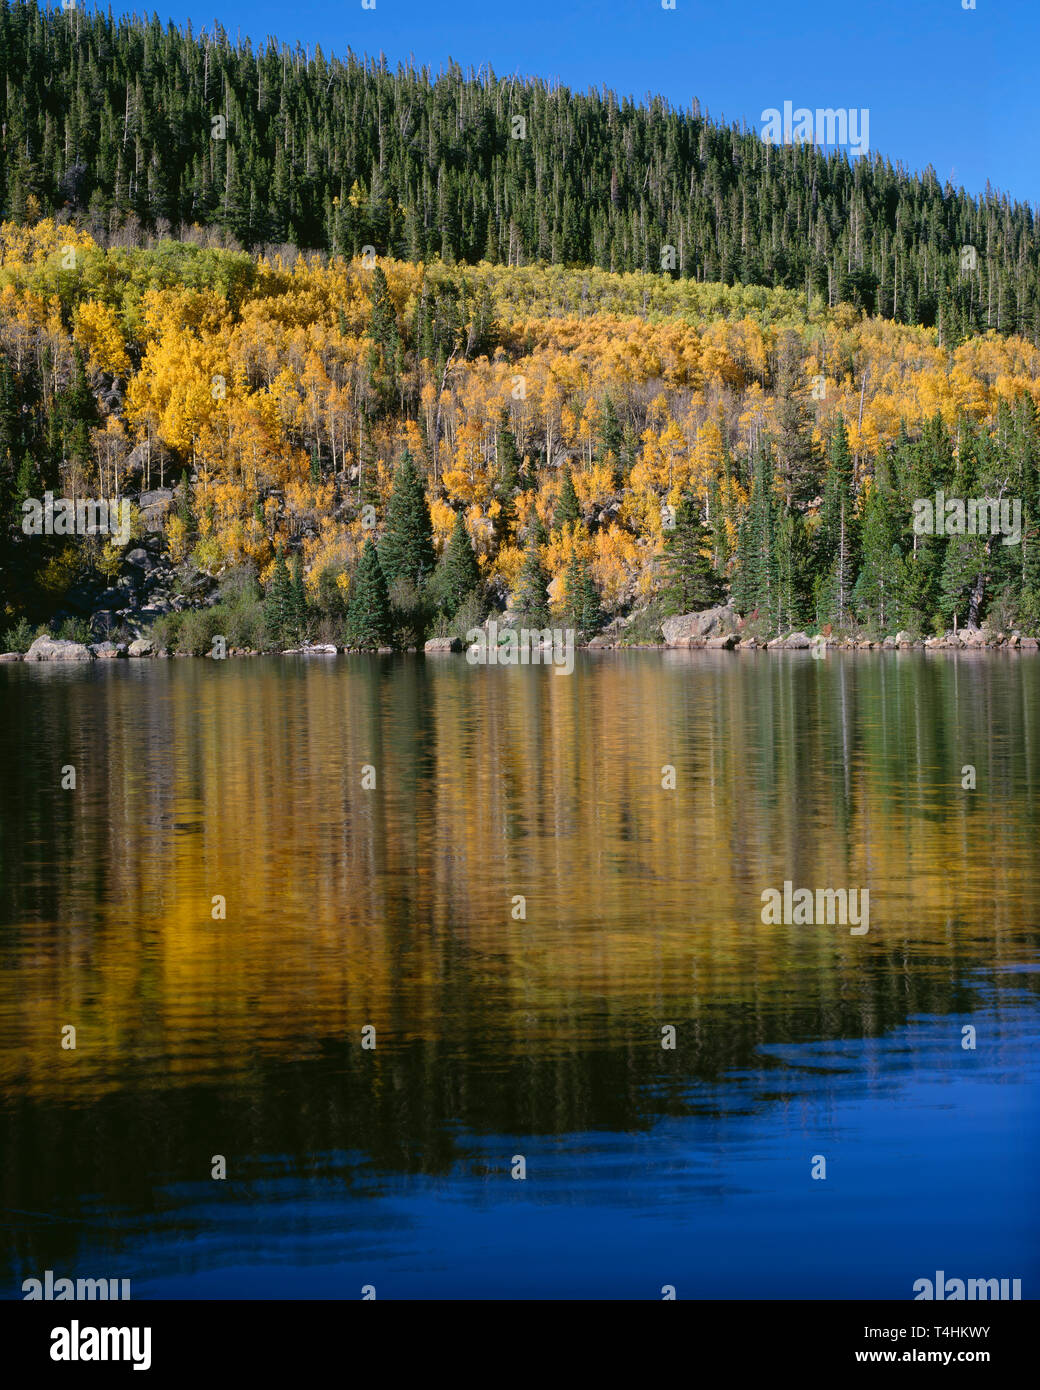 USA, Colorado, Rocky Mountain National Park, Fall colored quaking aspen and conifers reflect in Bear Lake. Stock Photo